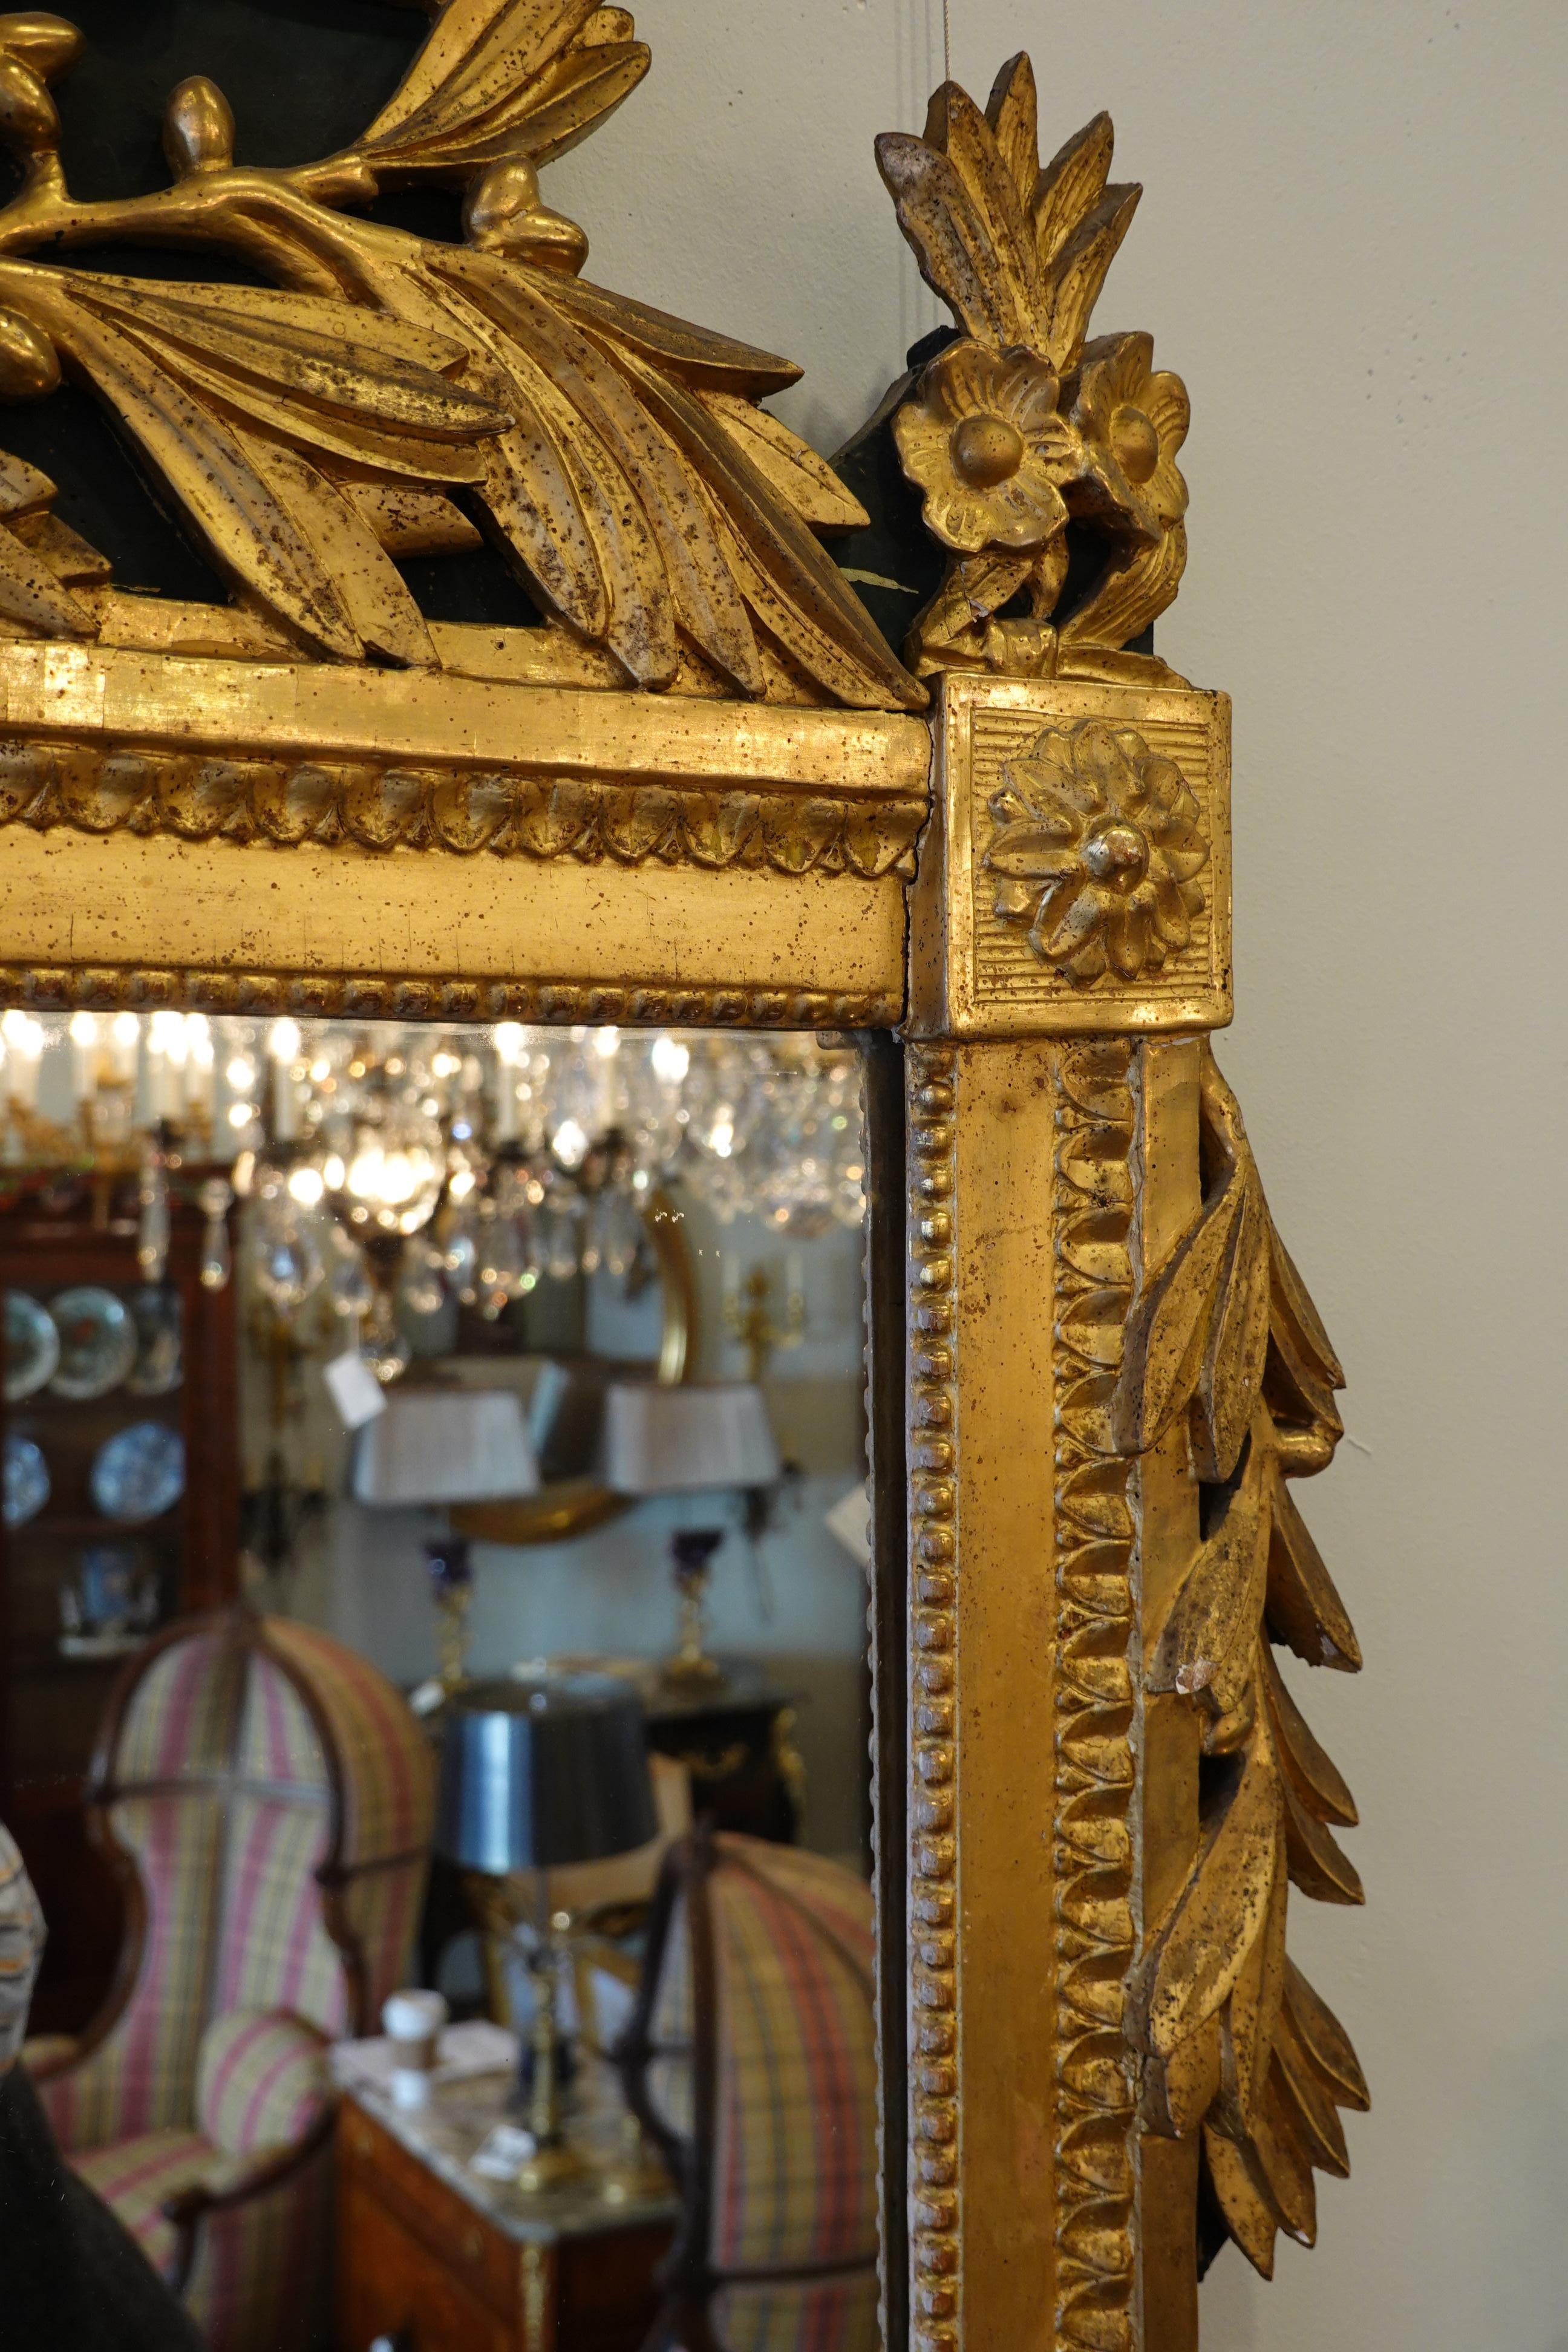 Louis XVI Period Giltwood Trumeau Mirror with Urn, Flowers and Laurel Leaves For Sale 6